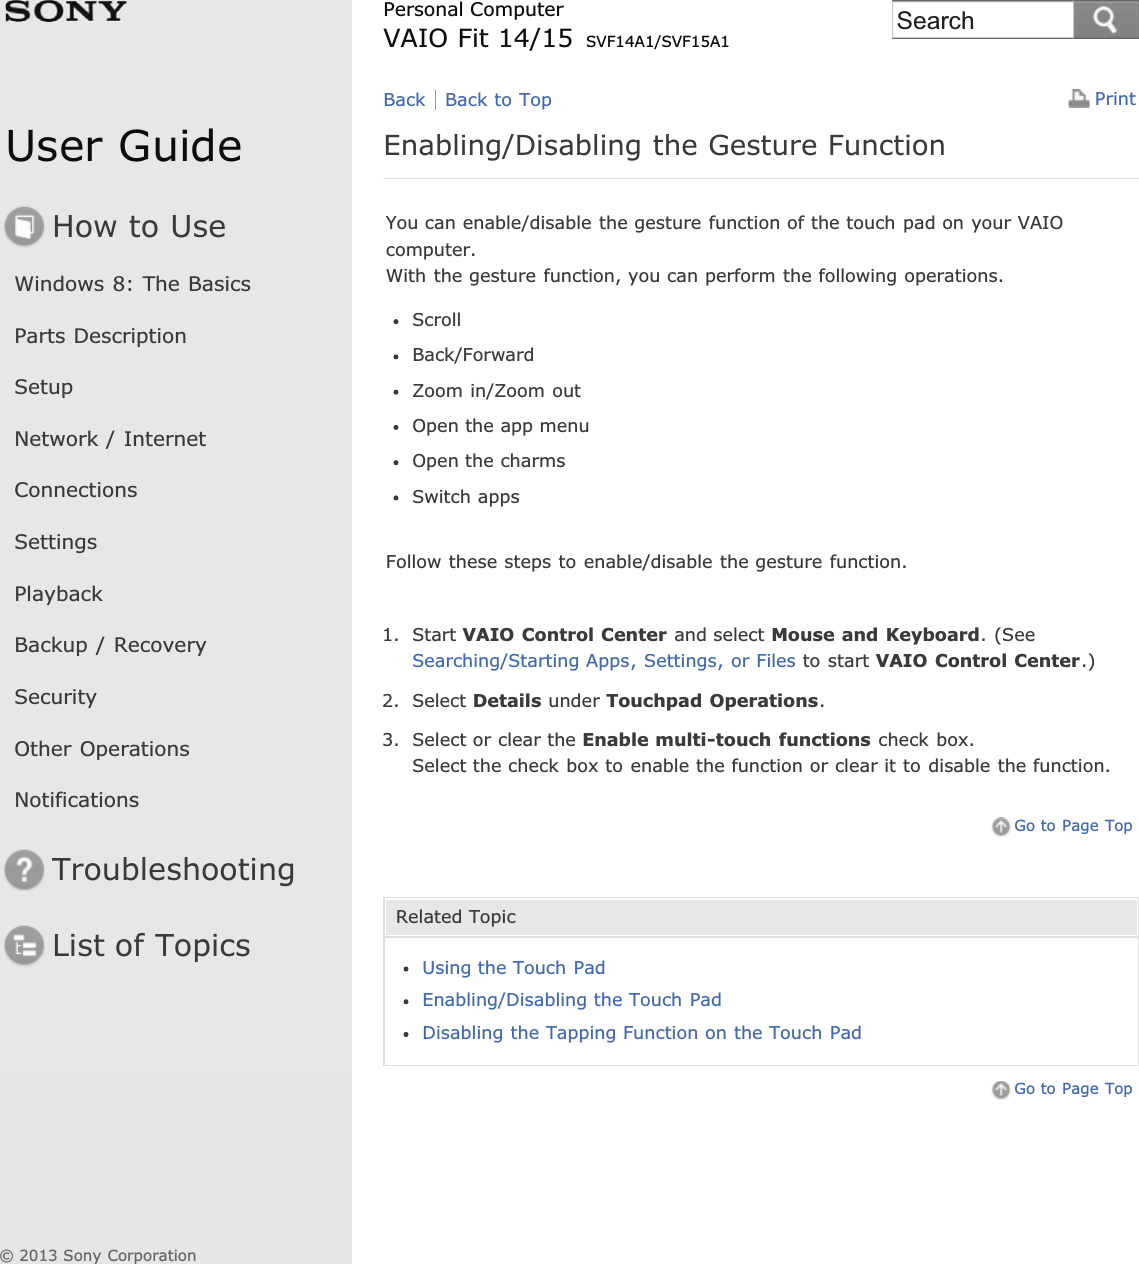 User GuideHow to UseWindows 8: The BasicsParts DescriptionSetupNetwork / InternetConnectionsSettingsPlaybackBackup / RecoverySecurityOther OperationsNotificationsTroubleshootingList of TopicsPrintPersonal ComputerVAIO Fit 14/15 SVF14A1/SVF15A1Enabling/Disabling the Gesture FunctionYou can enable/disable the gesture function of the touch pad on your VAIOcomputer.With the gesture function, you can perform the following operations.ScrollBack/ForwardZoom in/Zoom outOpen the app menuOpen the charmsSwitch appsFollow these steps to enable/disable the gesture function.1. Start VAIO Control Center and select Mouse and Keyboard. (SeeSearching/Starting Apps, Settings, or Files to start VAIO Control Center.)2. Select Details under Touchpad Operations.3. Select or clear the Enable multi-touch functions check box.Select the check box to enable the function or clear it to disable the function.Go to Page TopRelated TopicUsing the Touch PadEnabling/Disabling the Touch PadDisabling the Tapping Function on the Touch PadGo to Page TopBack Back to Top© 2013 Sony CorporationSearch